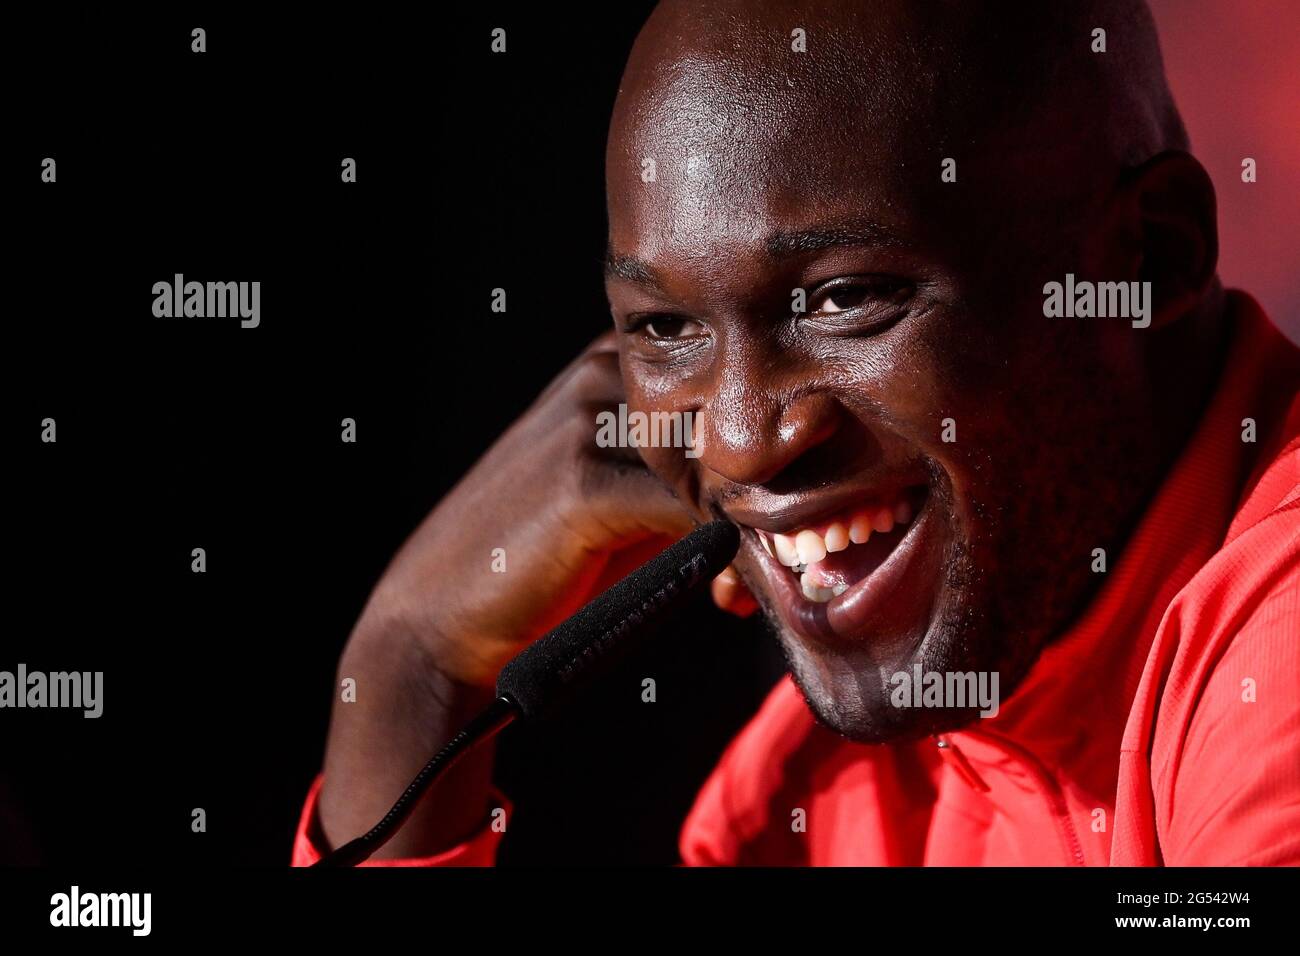 Belgium's Romelu Lukaku pictured during a press conference of the Belgian national soccer team Red Devils, in Tubize, Friday 25 June 2021. The team is Stock Photo